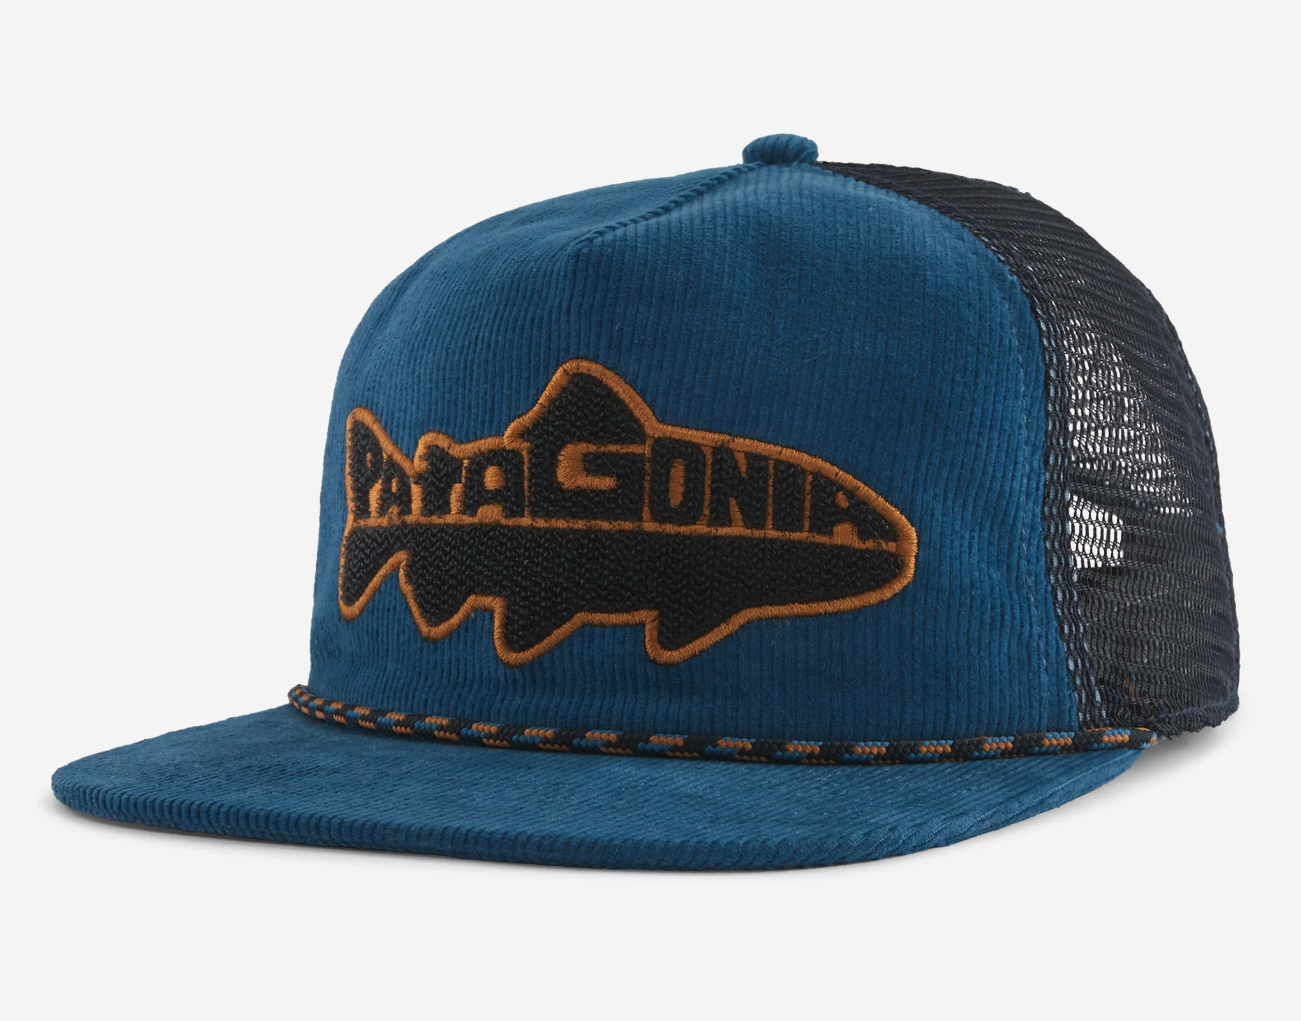 Patagonia Fly Catcher Hat  Buy Patagonia Fly Fishing Hats Online